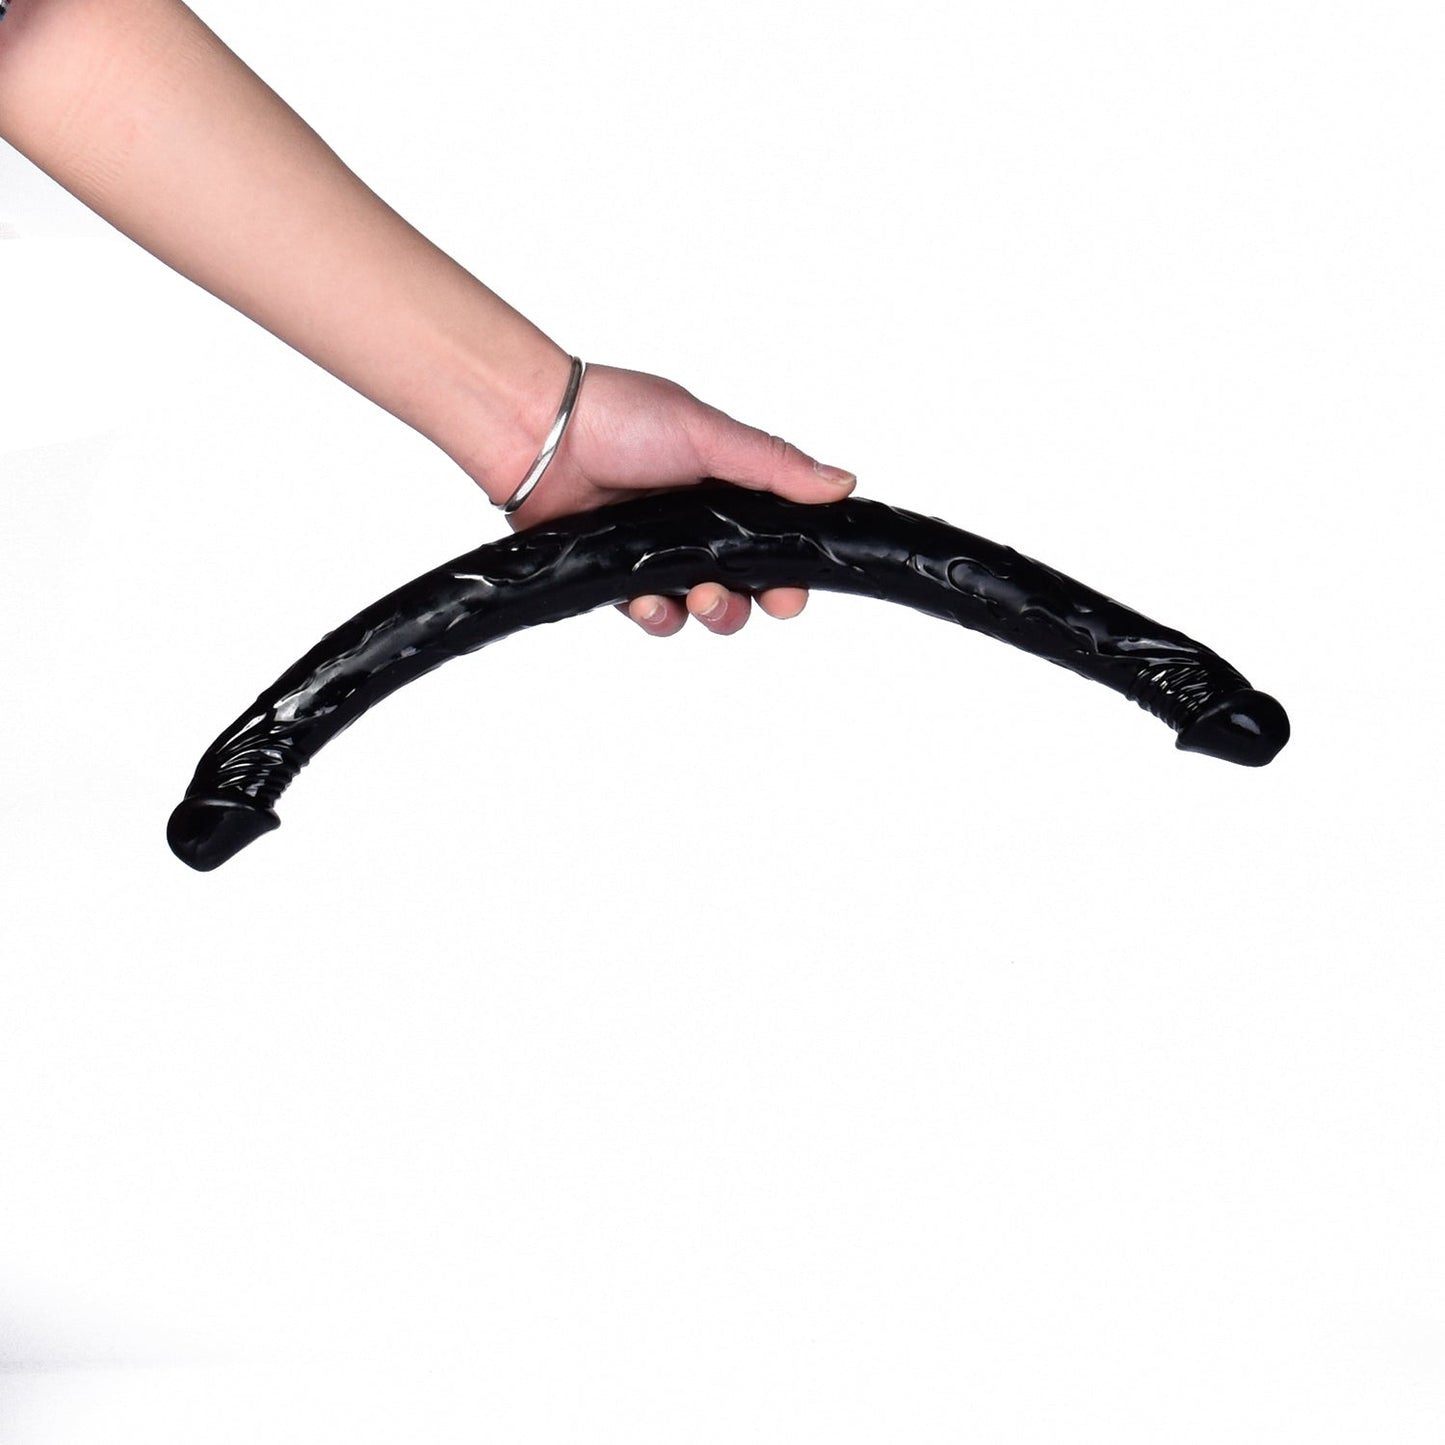 The Johnson 16 Inch Silicone Double Ended Monster Dildo